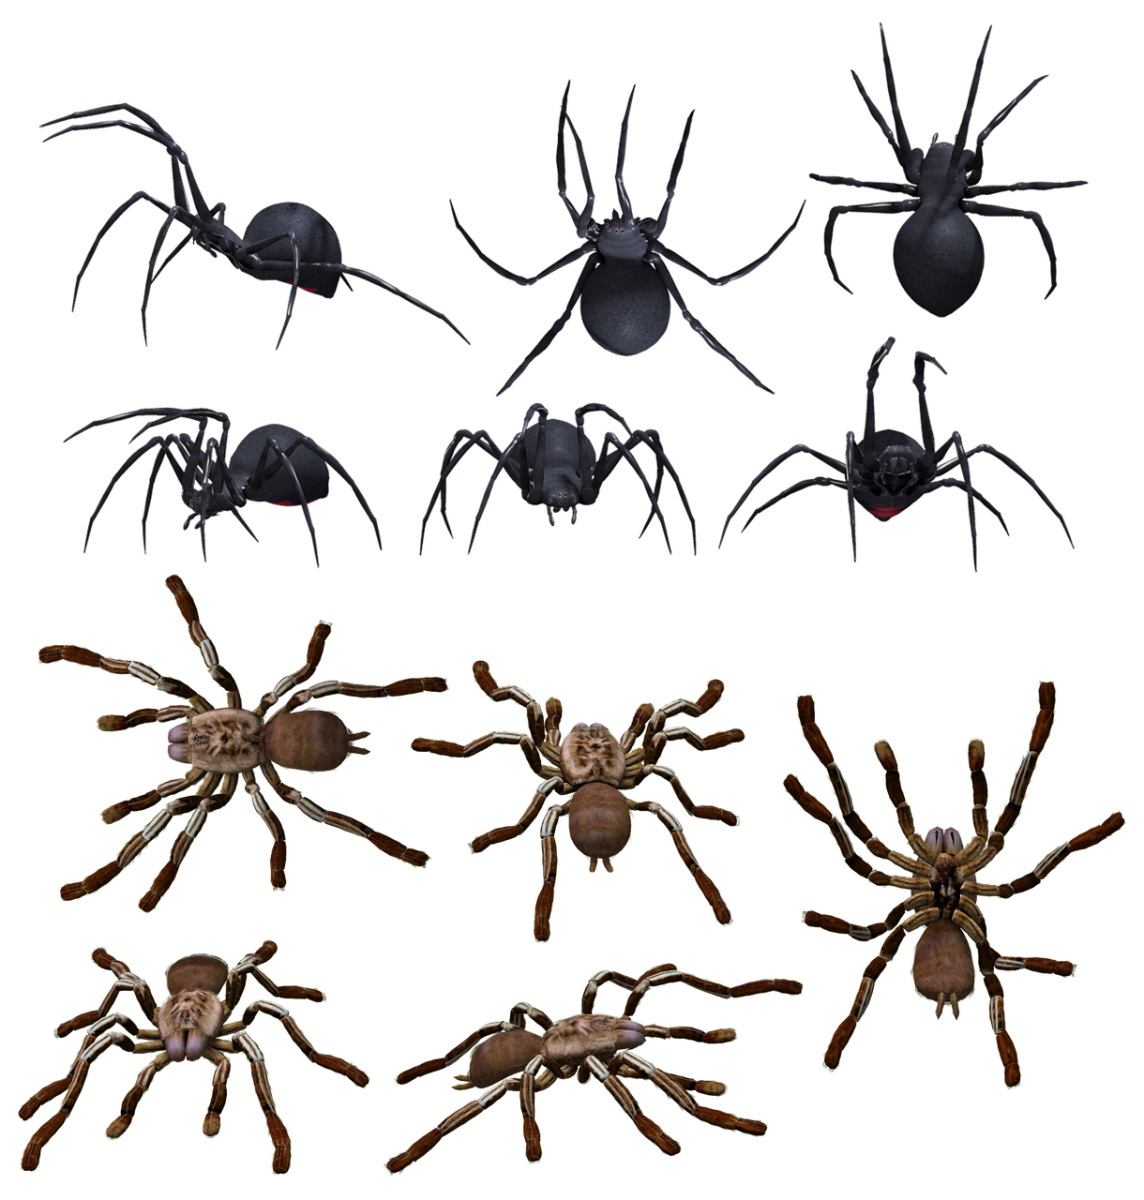 The widow (top) and the recluse (bottom) types of spiders are the only North American arachnids that pose any kind of threat to humans.